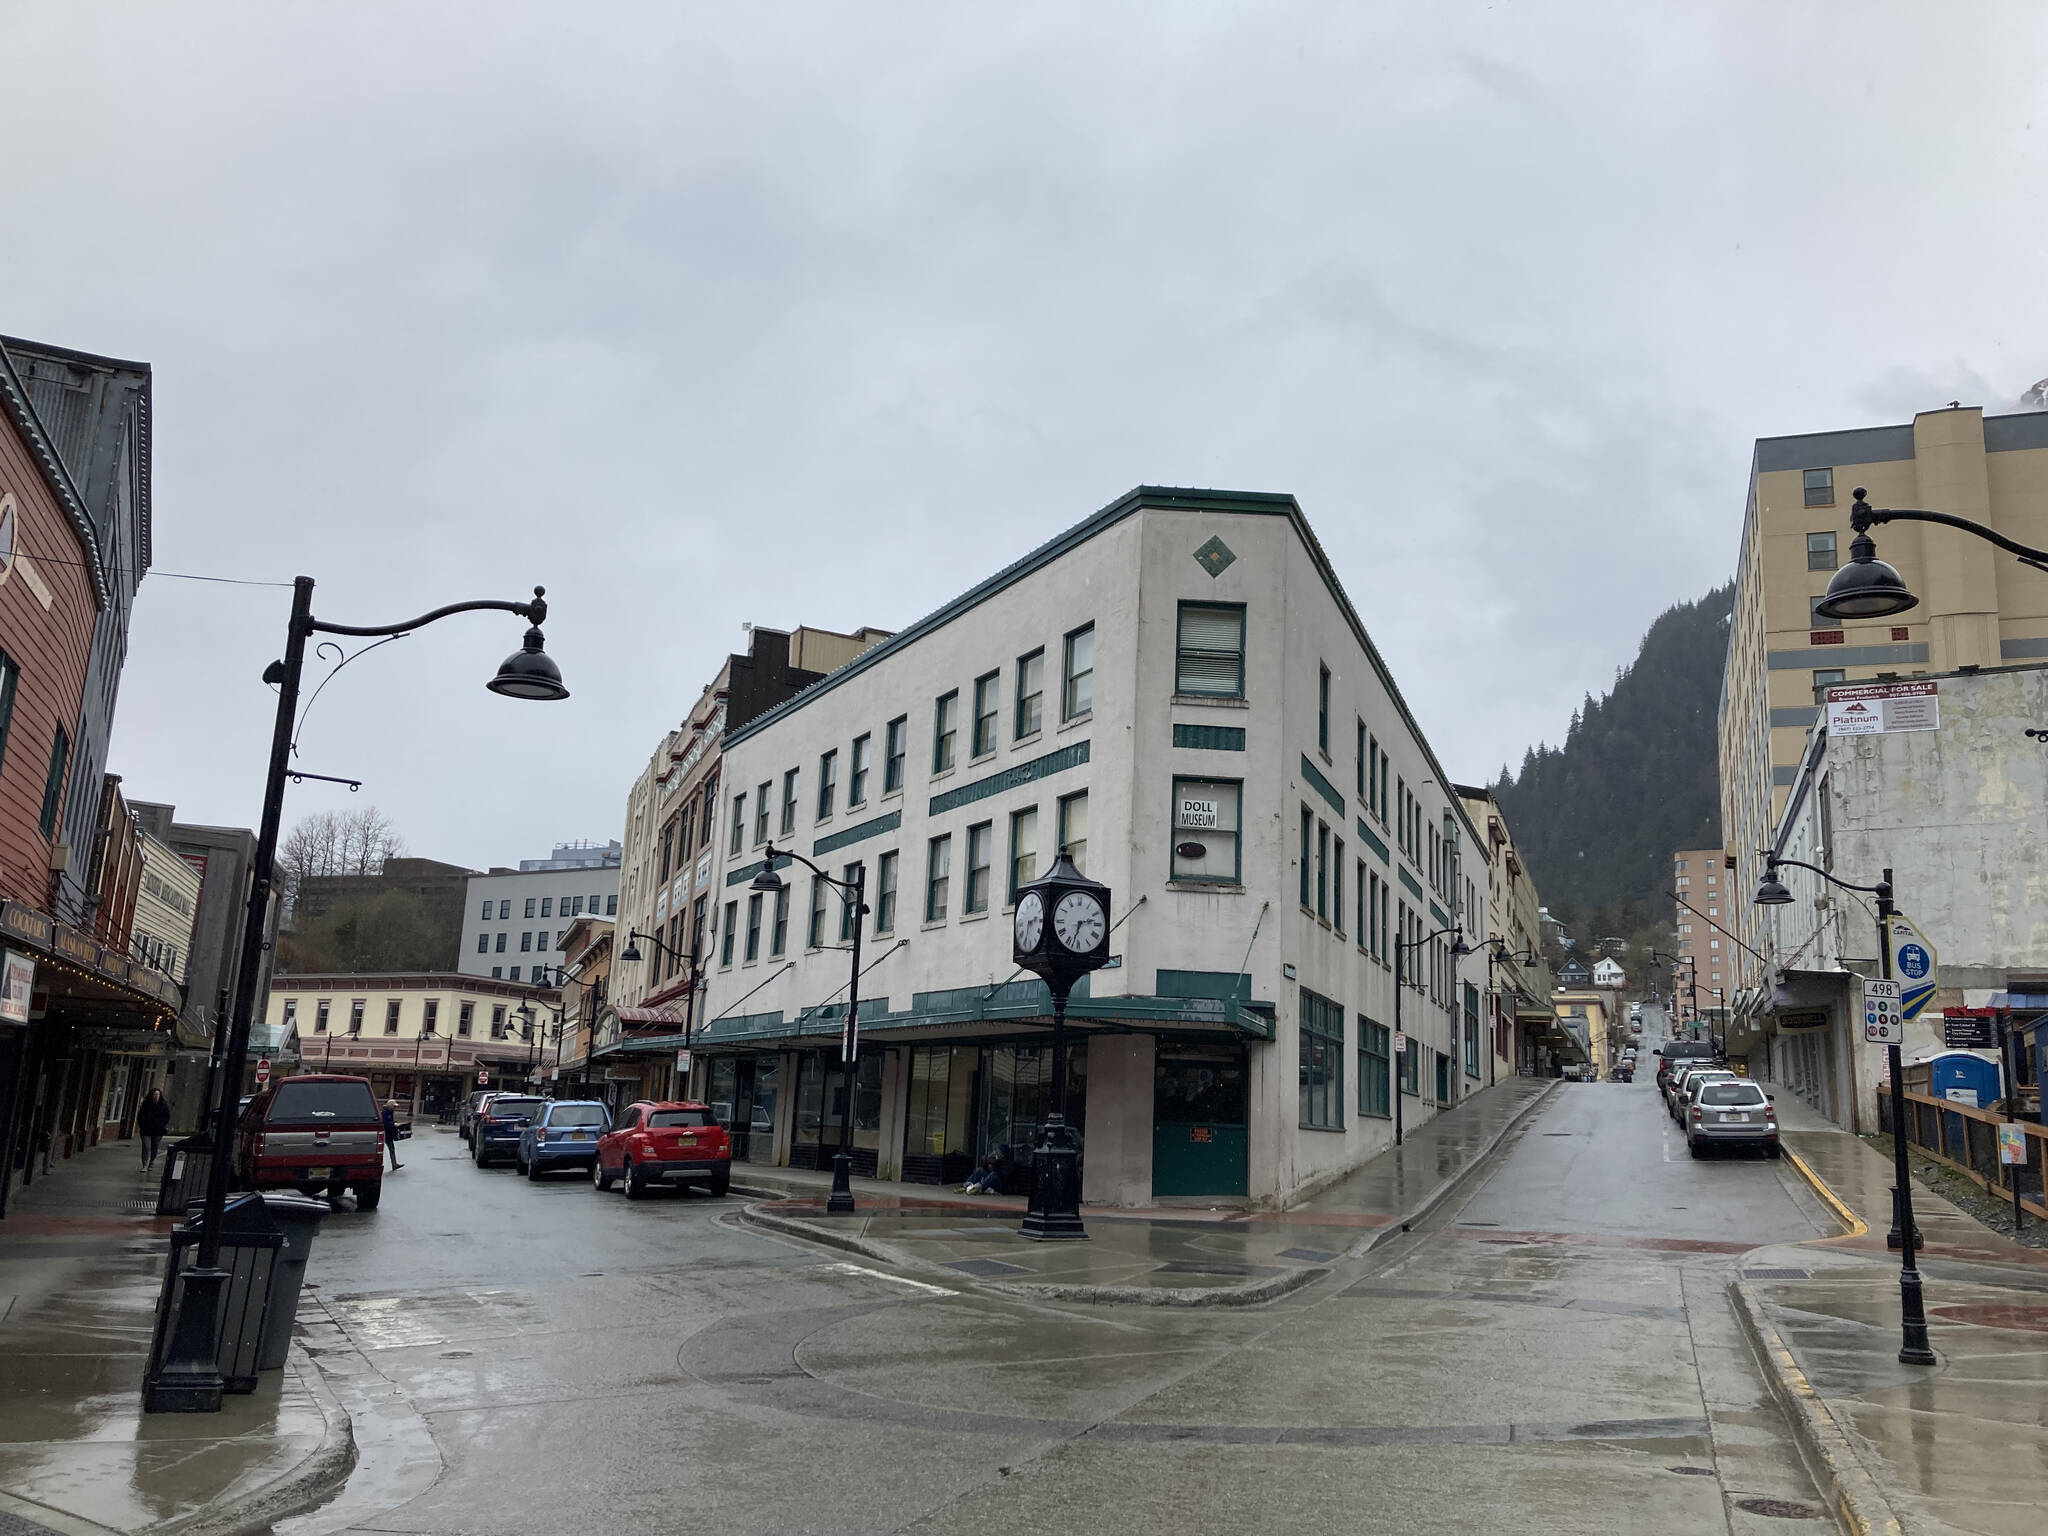 Downtown Juneau, Alaska, is seen on Saturday, April 23, 2022. (Camille Botello/Peninsula Clarion)